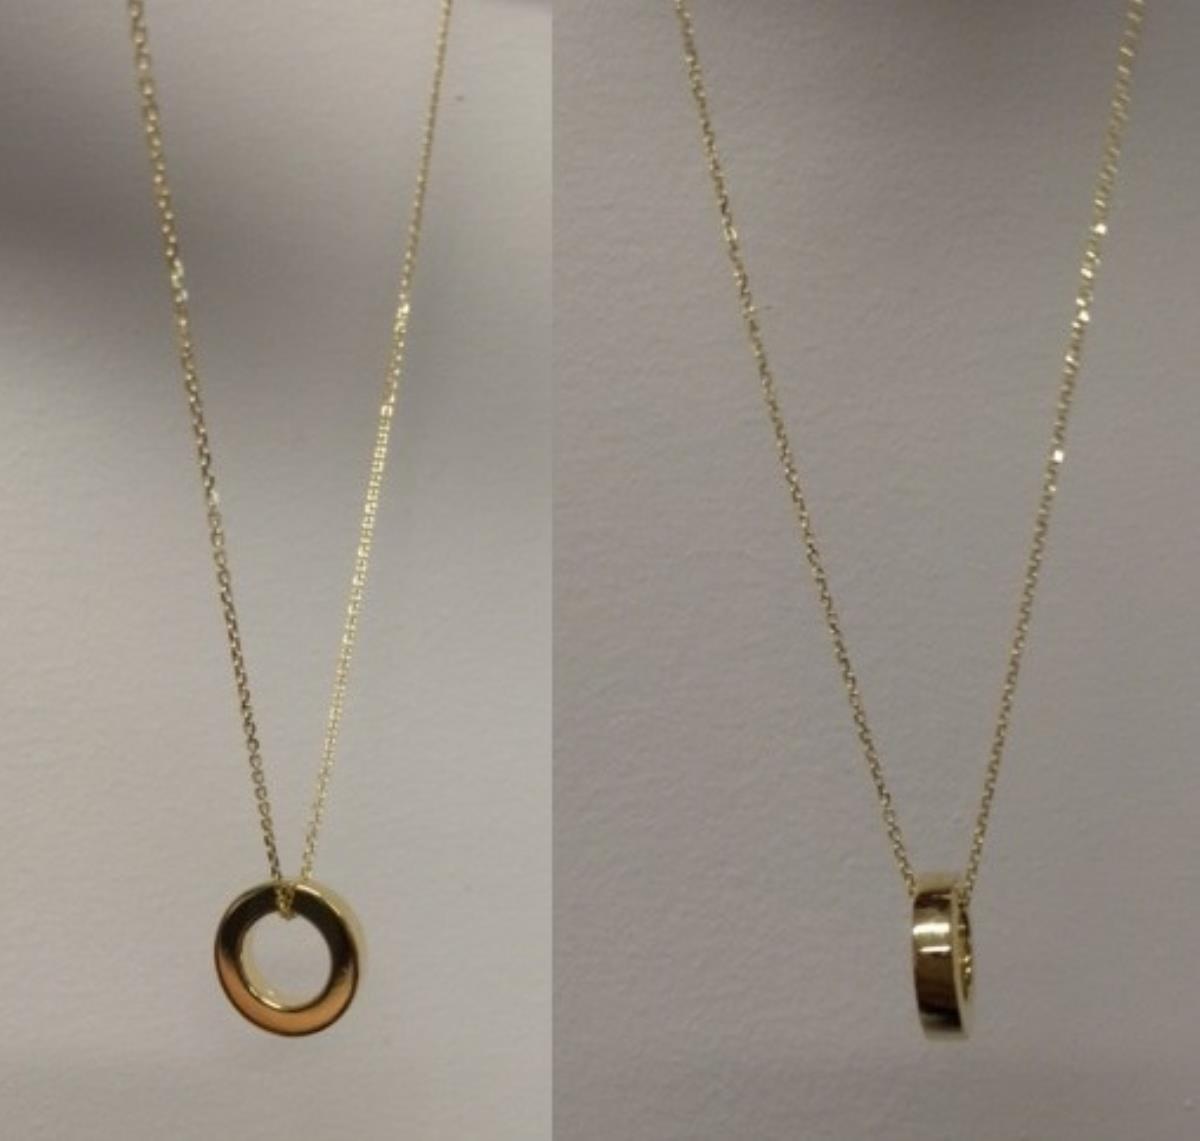 10K Yellow Gold 17" Cable Chain With Circle Pendant Necklace